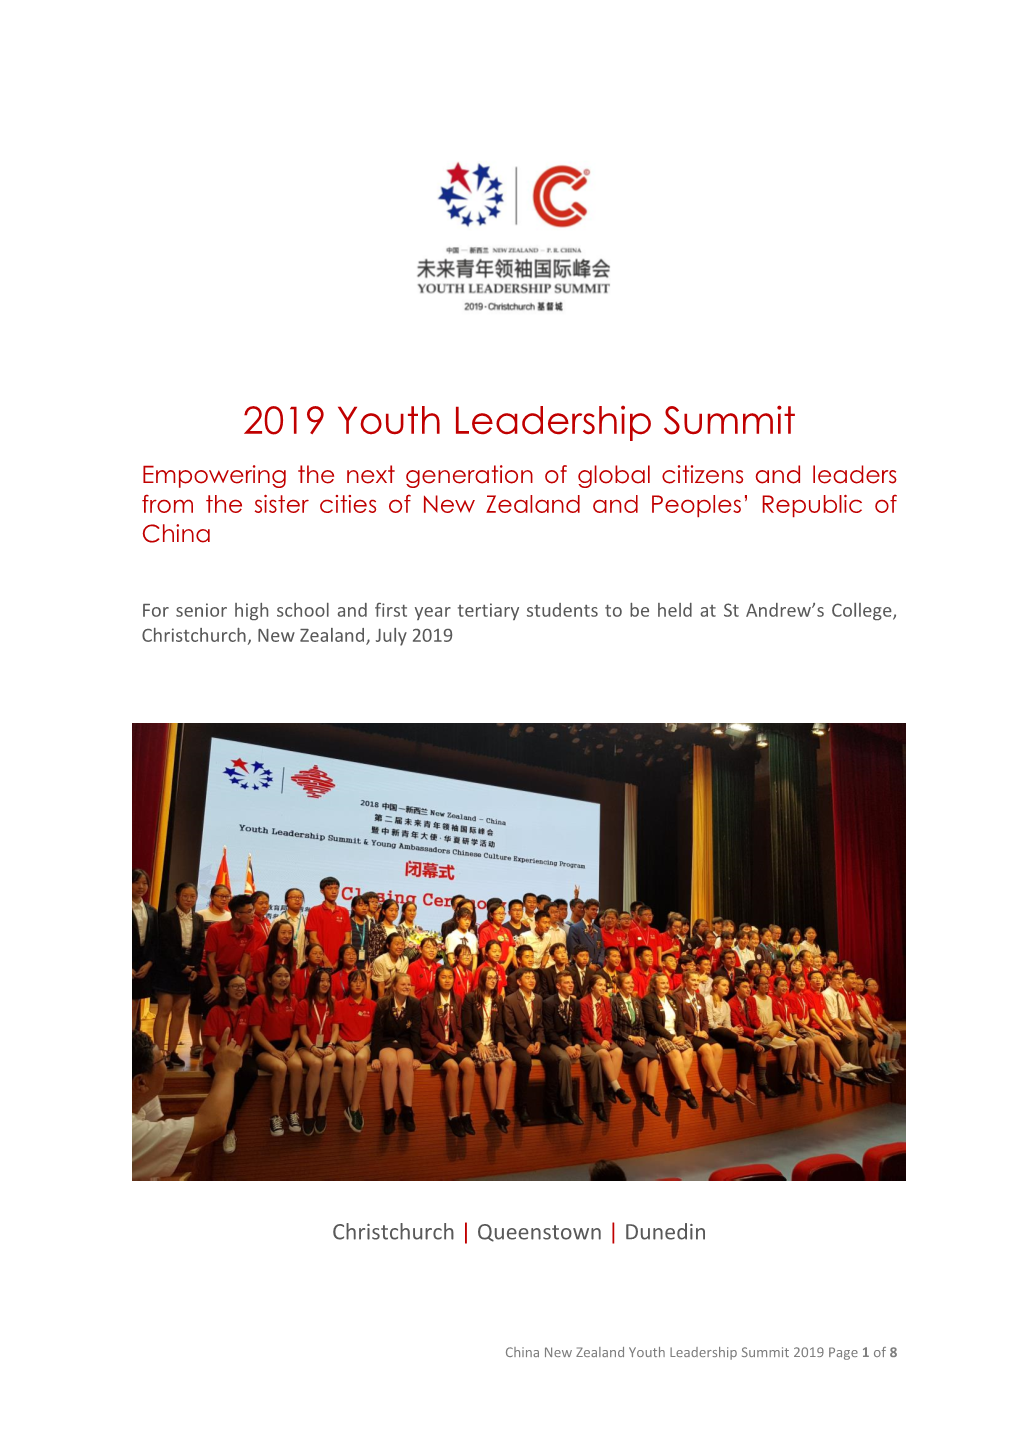 2019 Youth Leadership Summit Empowering the Next Generation of Global Citizens and Leaders from the Sister Cities of New Zealand and Peoples’ Republic of China